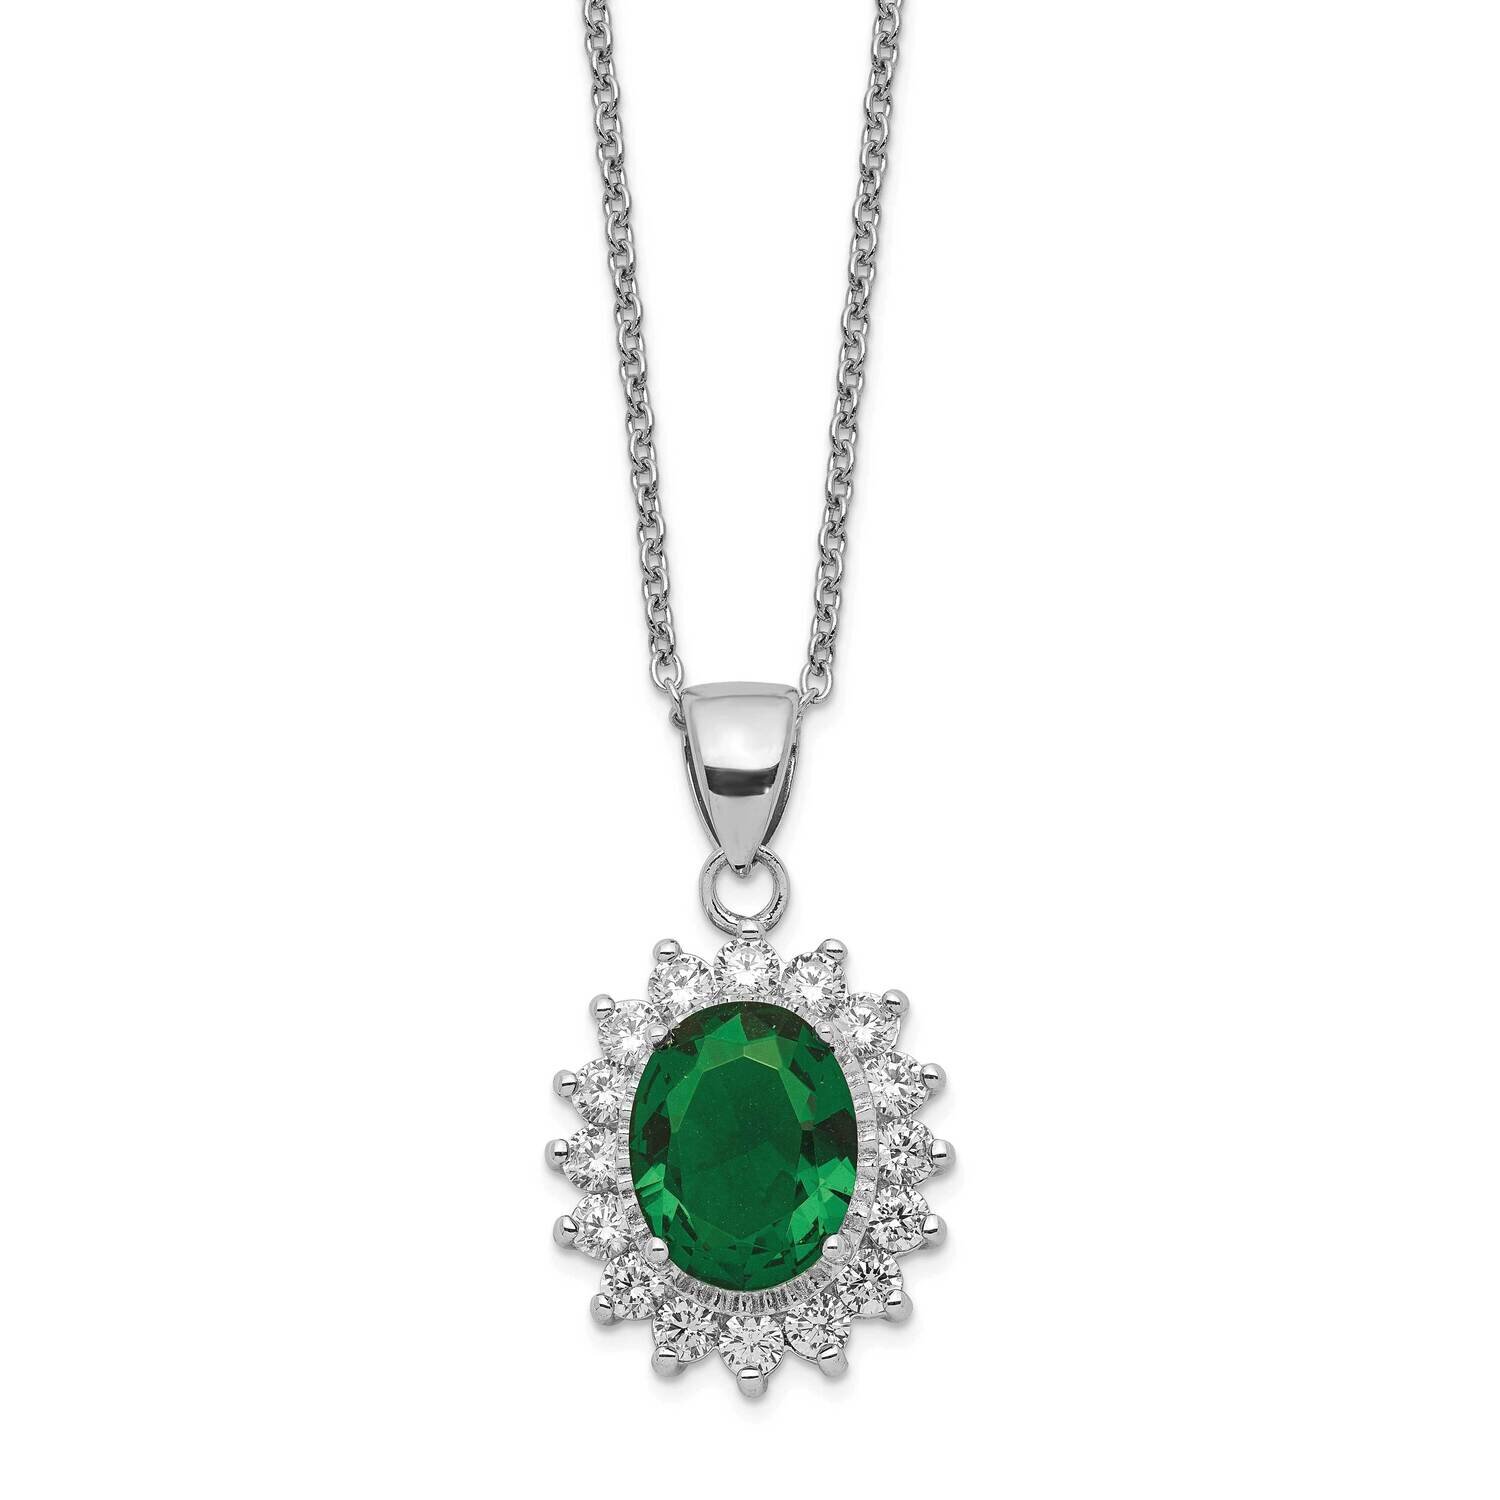 CZ Diamond & Green Glass 18.25 Inch Necklace Sterling Silver Rhodium Plated QCM1410-18.25